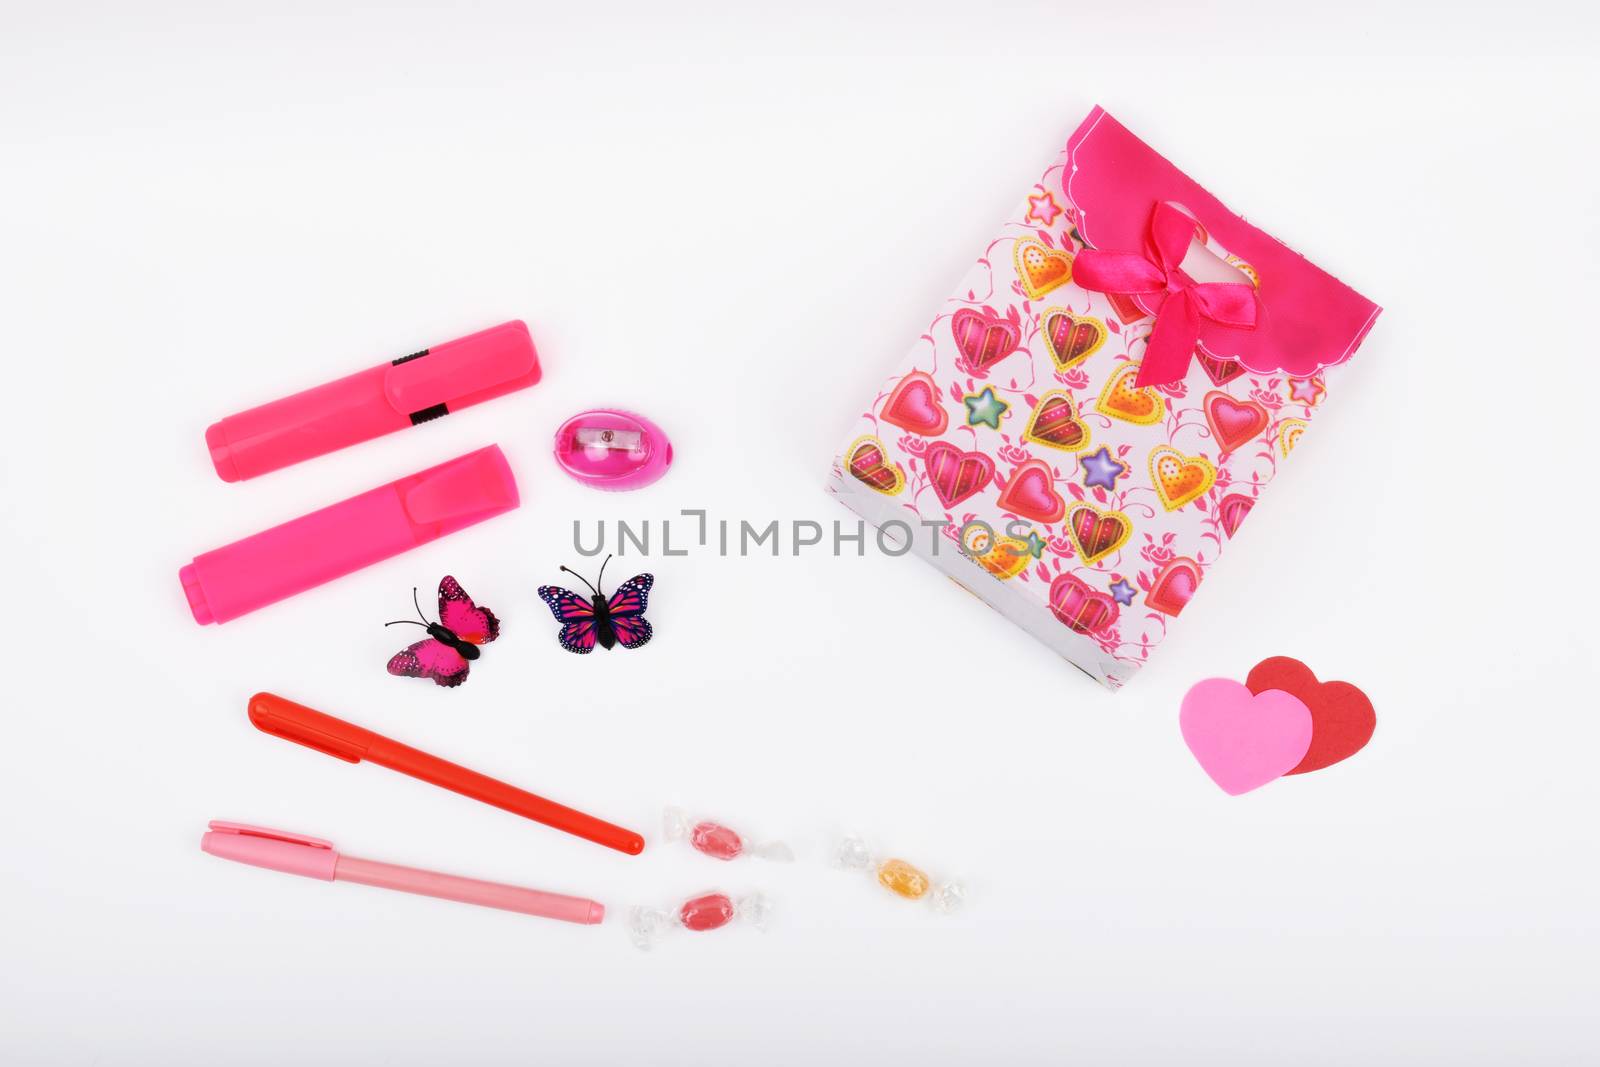 Mock up objects isolated on the topic - Valentine's Day, top view